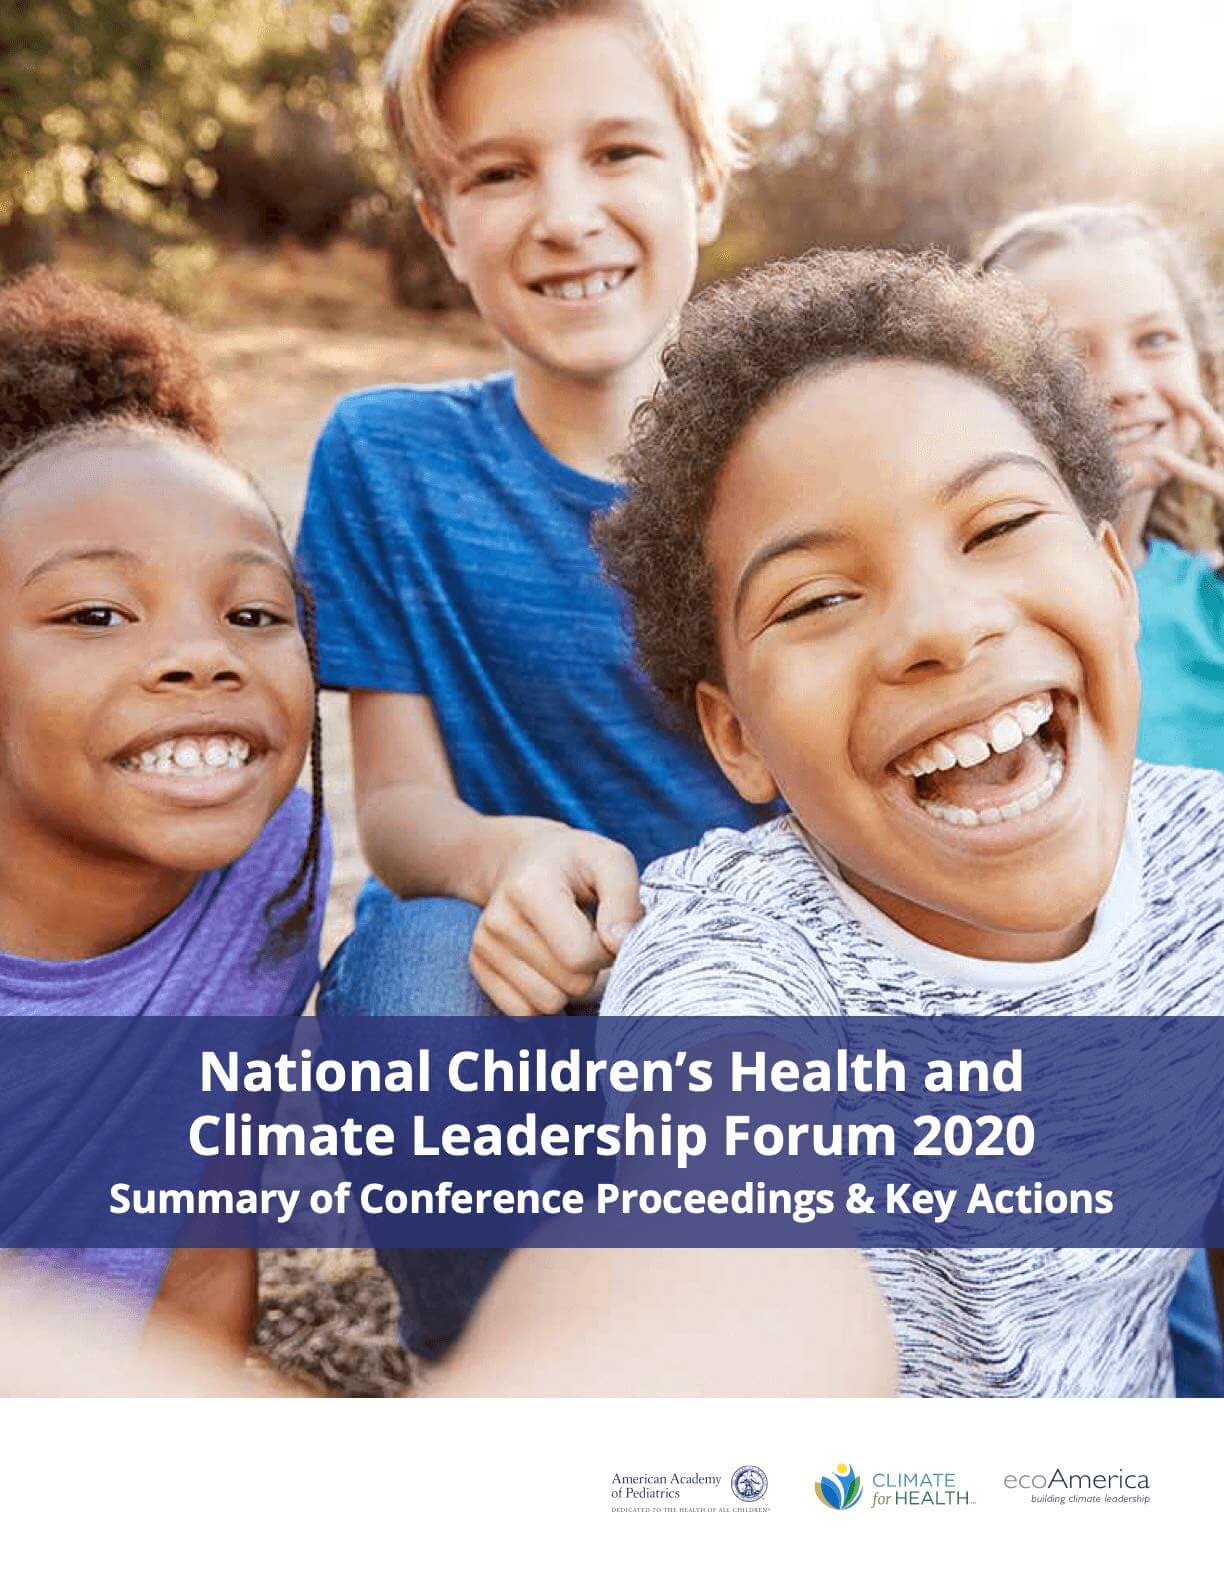 National Children’s Health and Climate Leadership Forum 2020: Summary of Conference Proceedings Key Actions